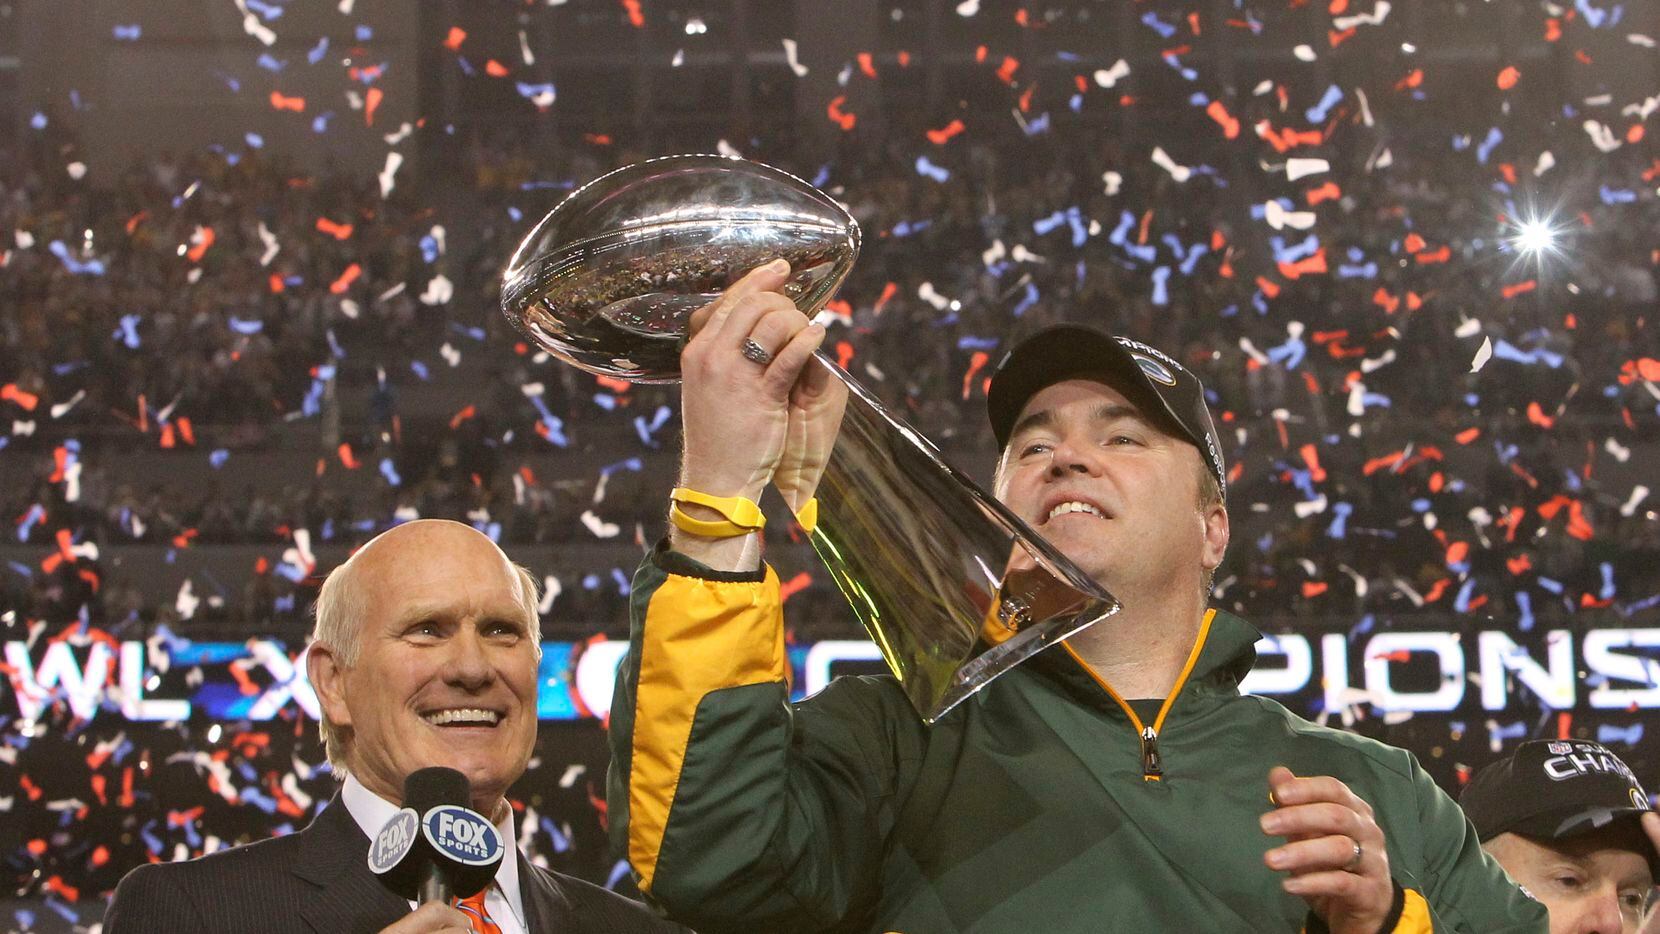 Green Bay Packers head coach Mike McCarthy admired the Lombardi Trophy as Terry Bradshaw...